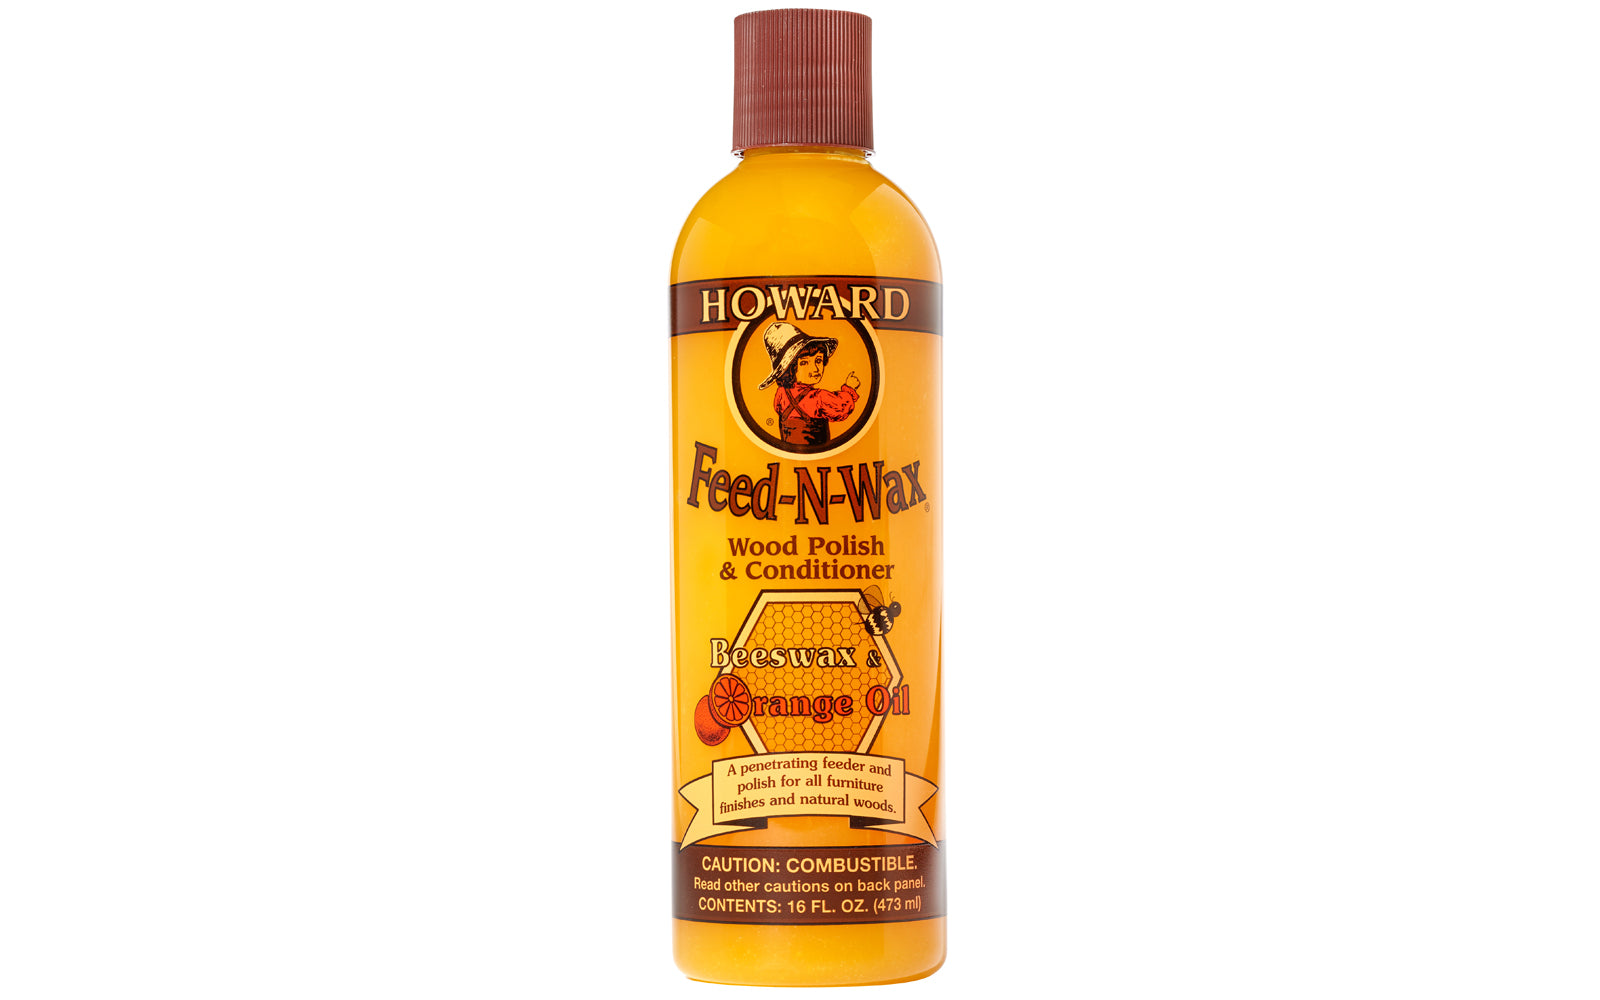 Howard Feed and Wax Wood Polish and Conditioner 16 oz.